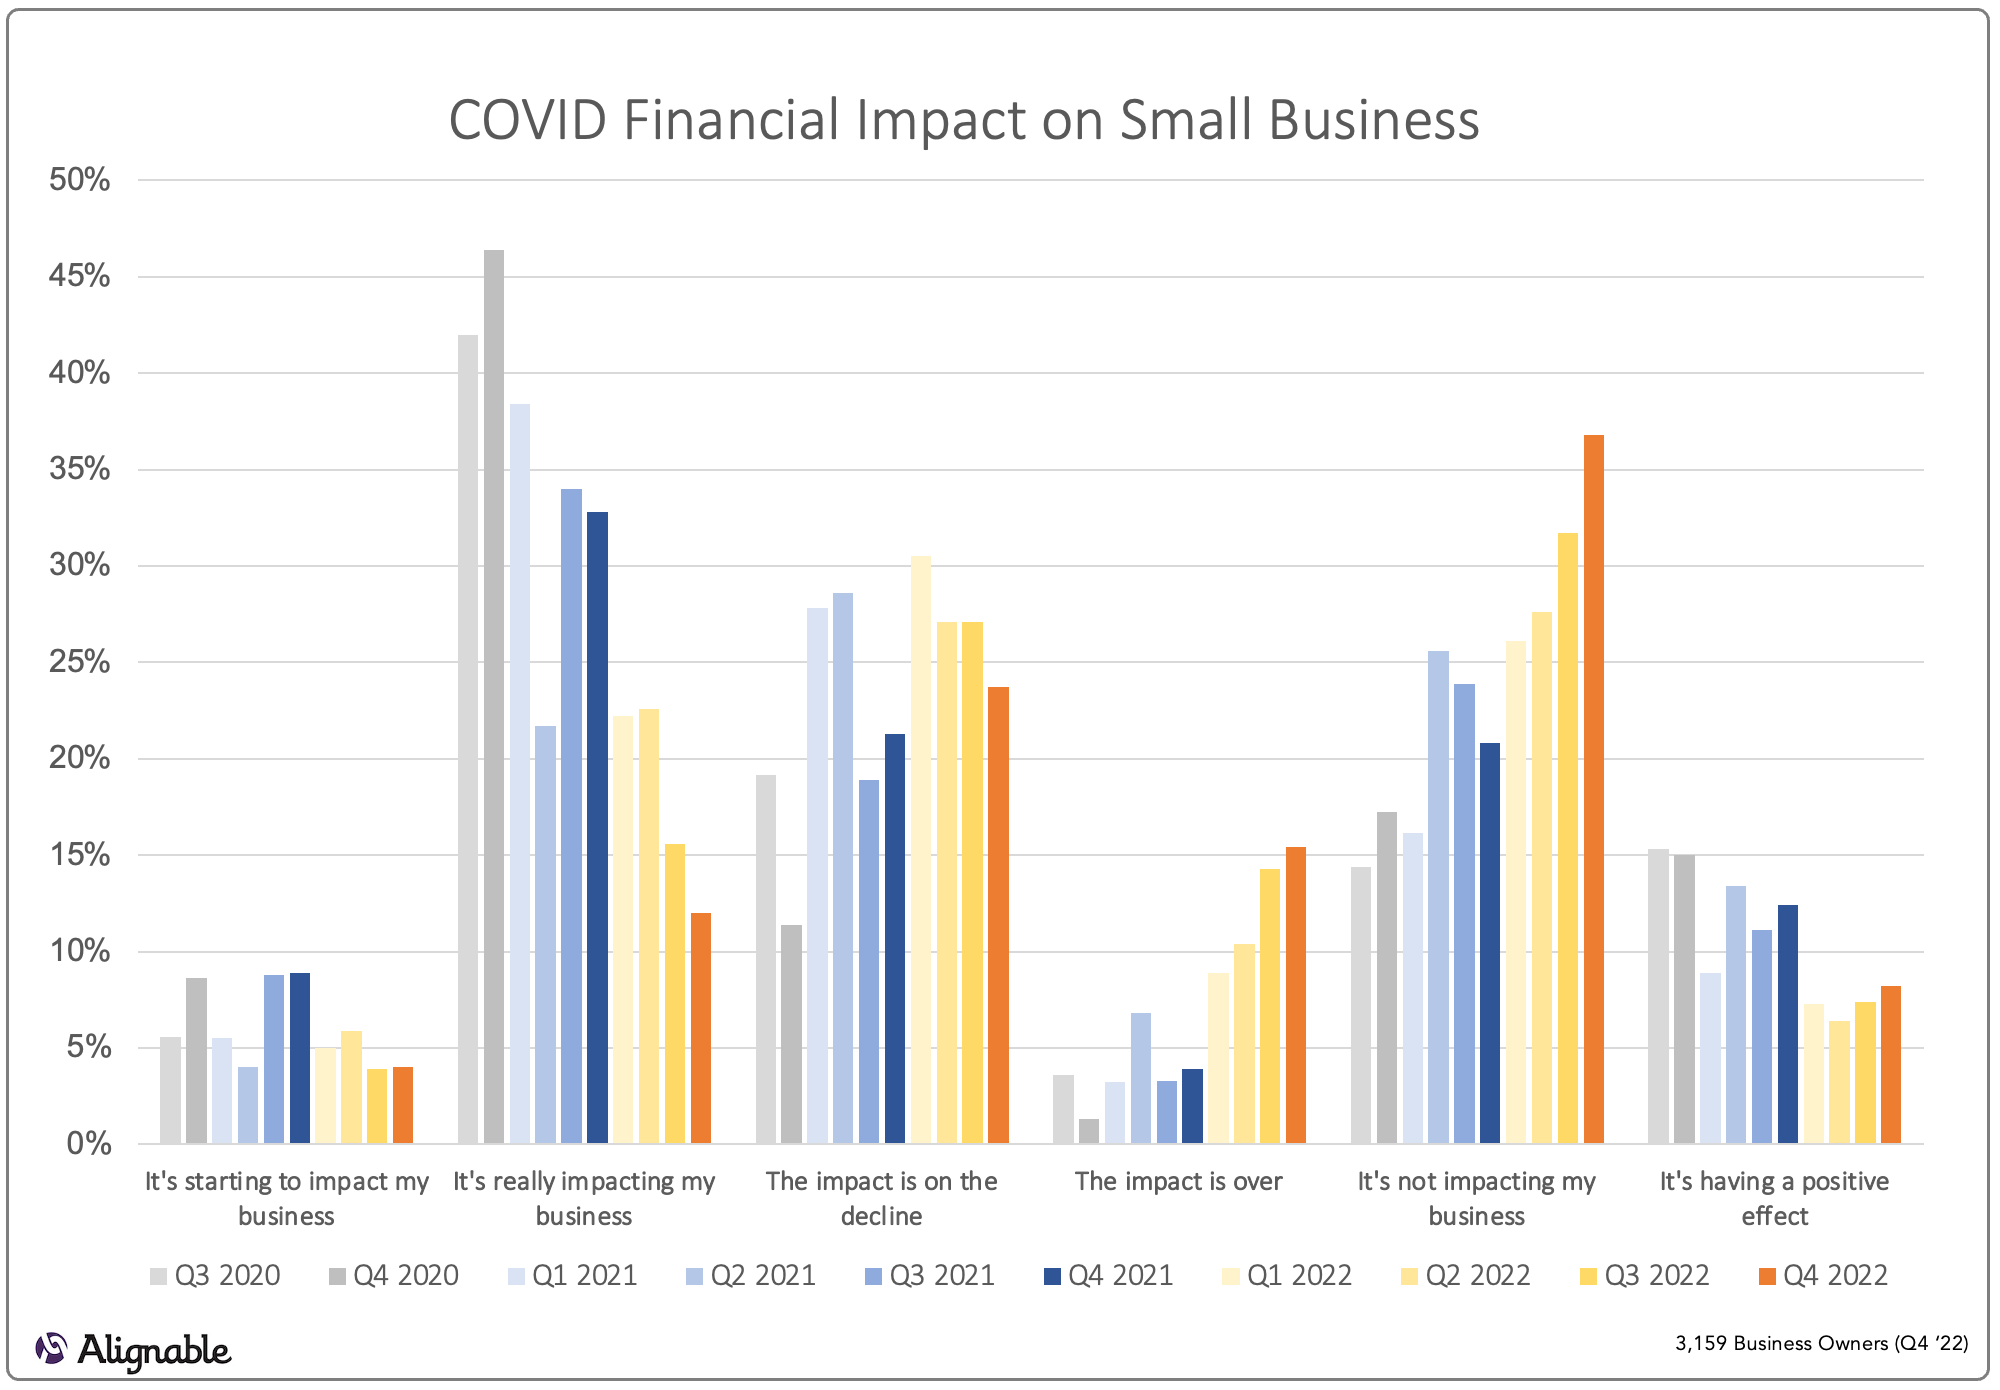 Covid Impact Over Time